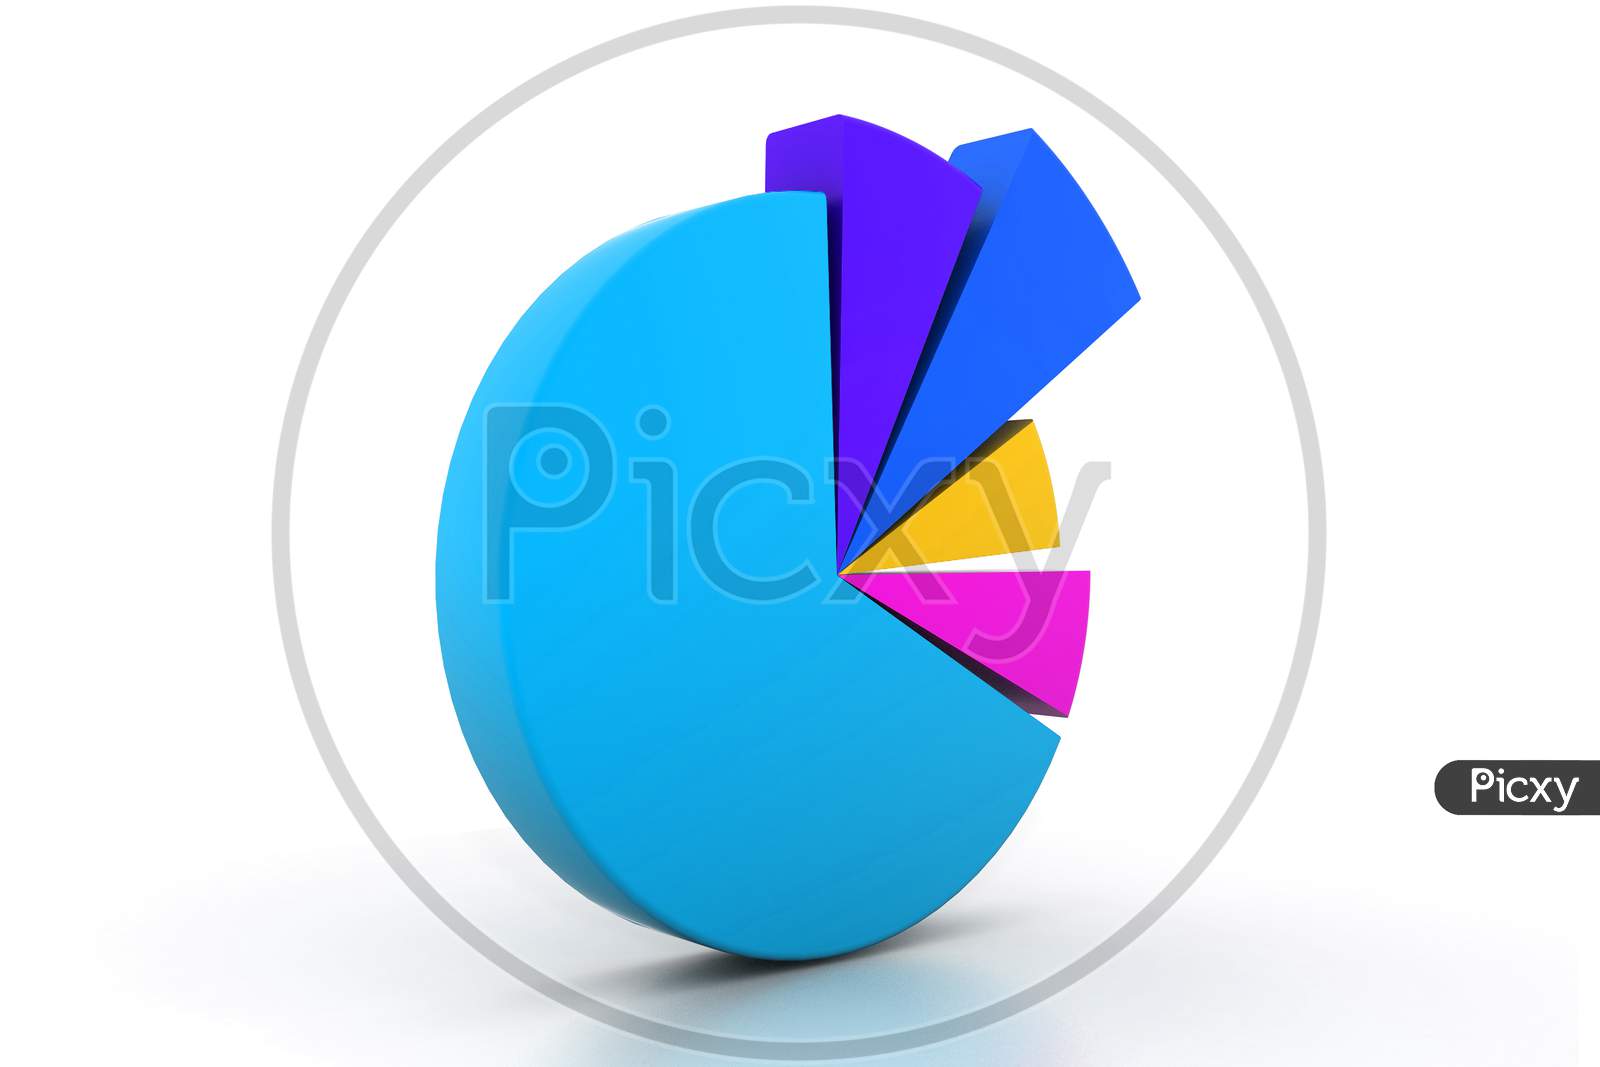 A Pie Chart Isolated with White Background